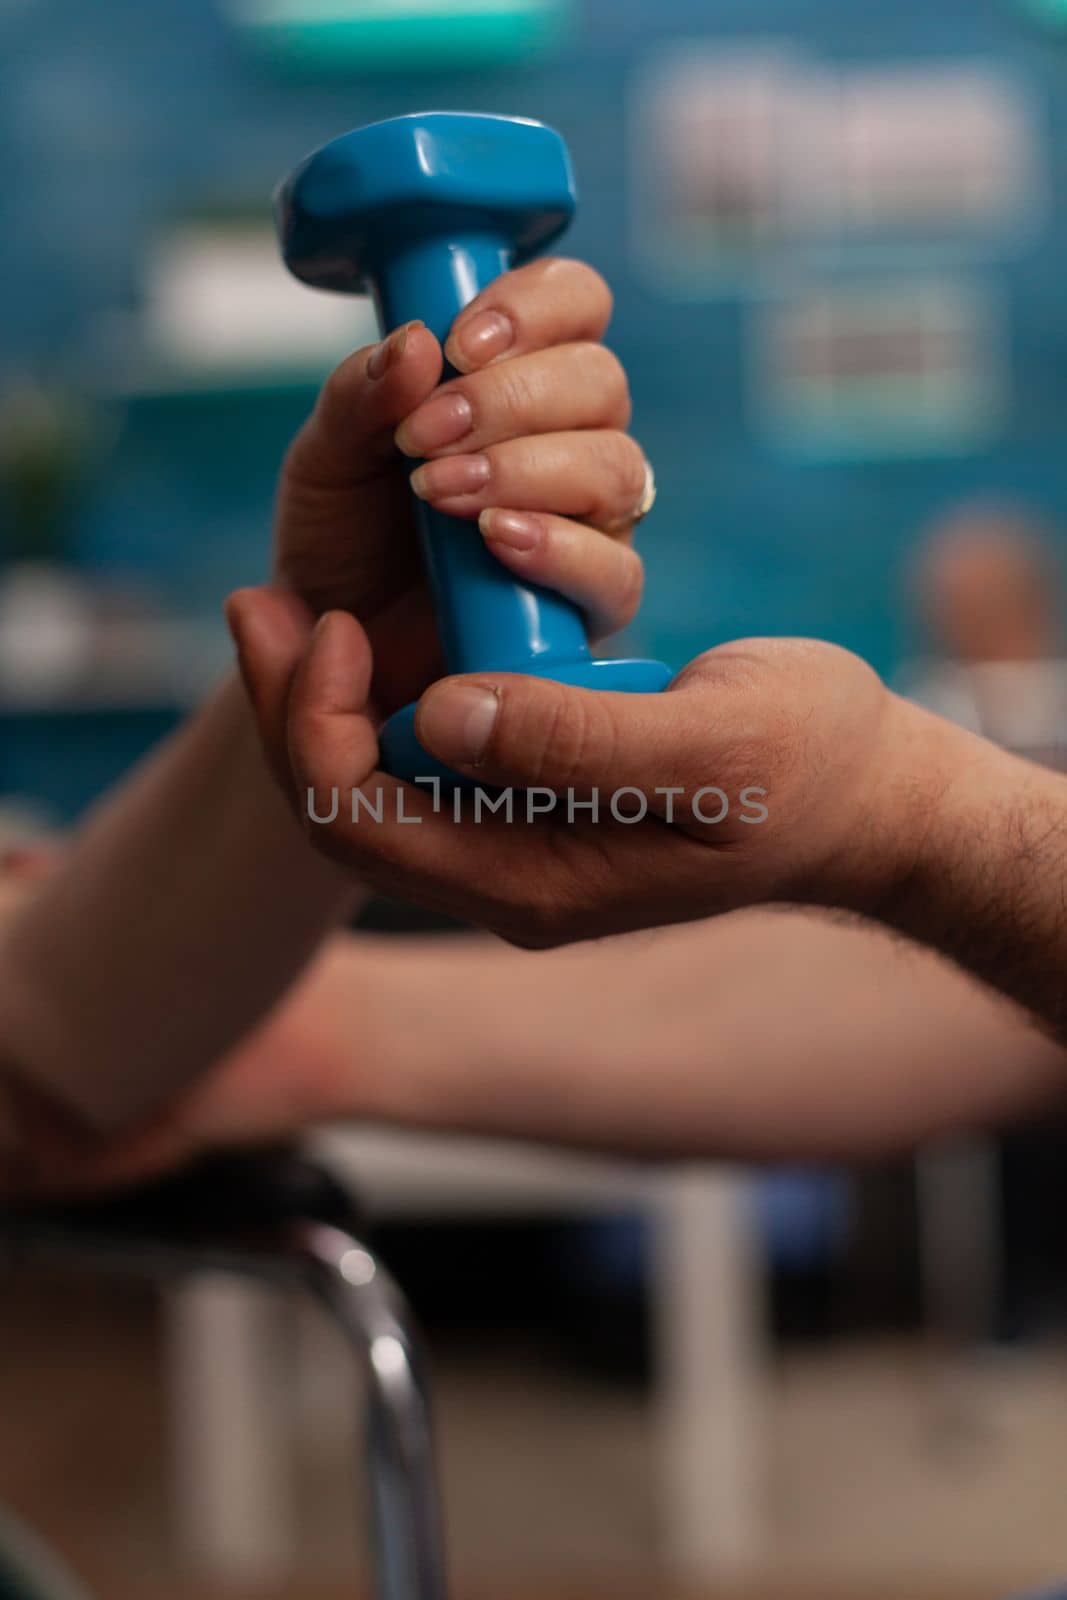 Female hand holding weights while male therapist helps her with exercises in nursing home. Specialized center for care and physical therapy of elderly people with disabilities, close up.